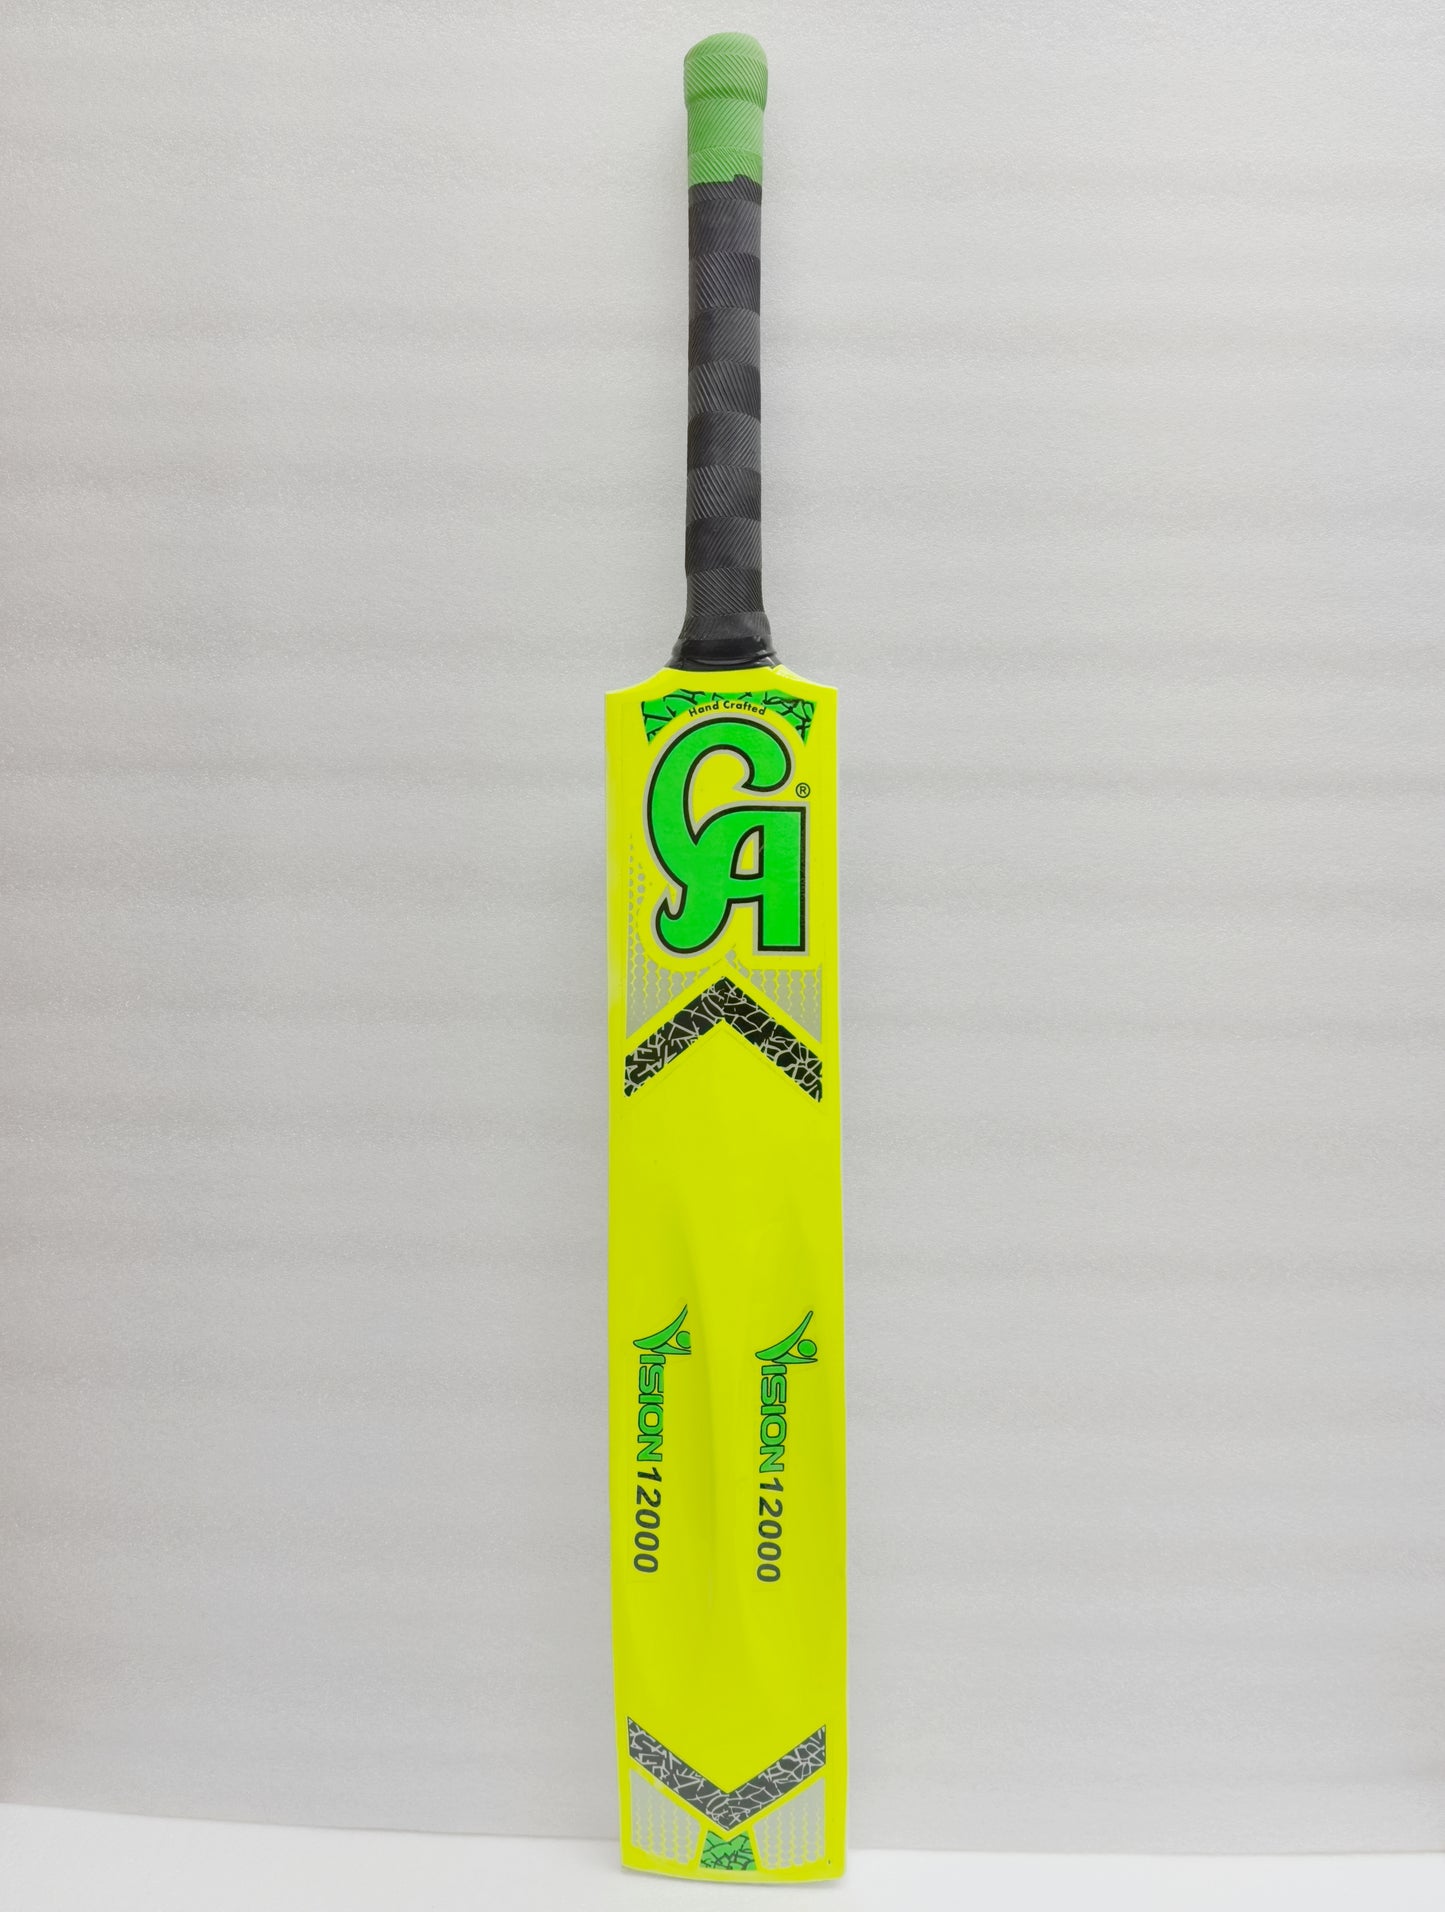 CA Vision 12000 tennis ball cricket bat in lime green, made of Poplar wood with full cane handle and thick edges for lightweight handling, ideal for tape ball cricket tournaments with a double-colored grip.